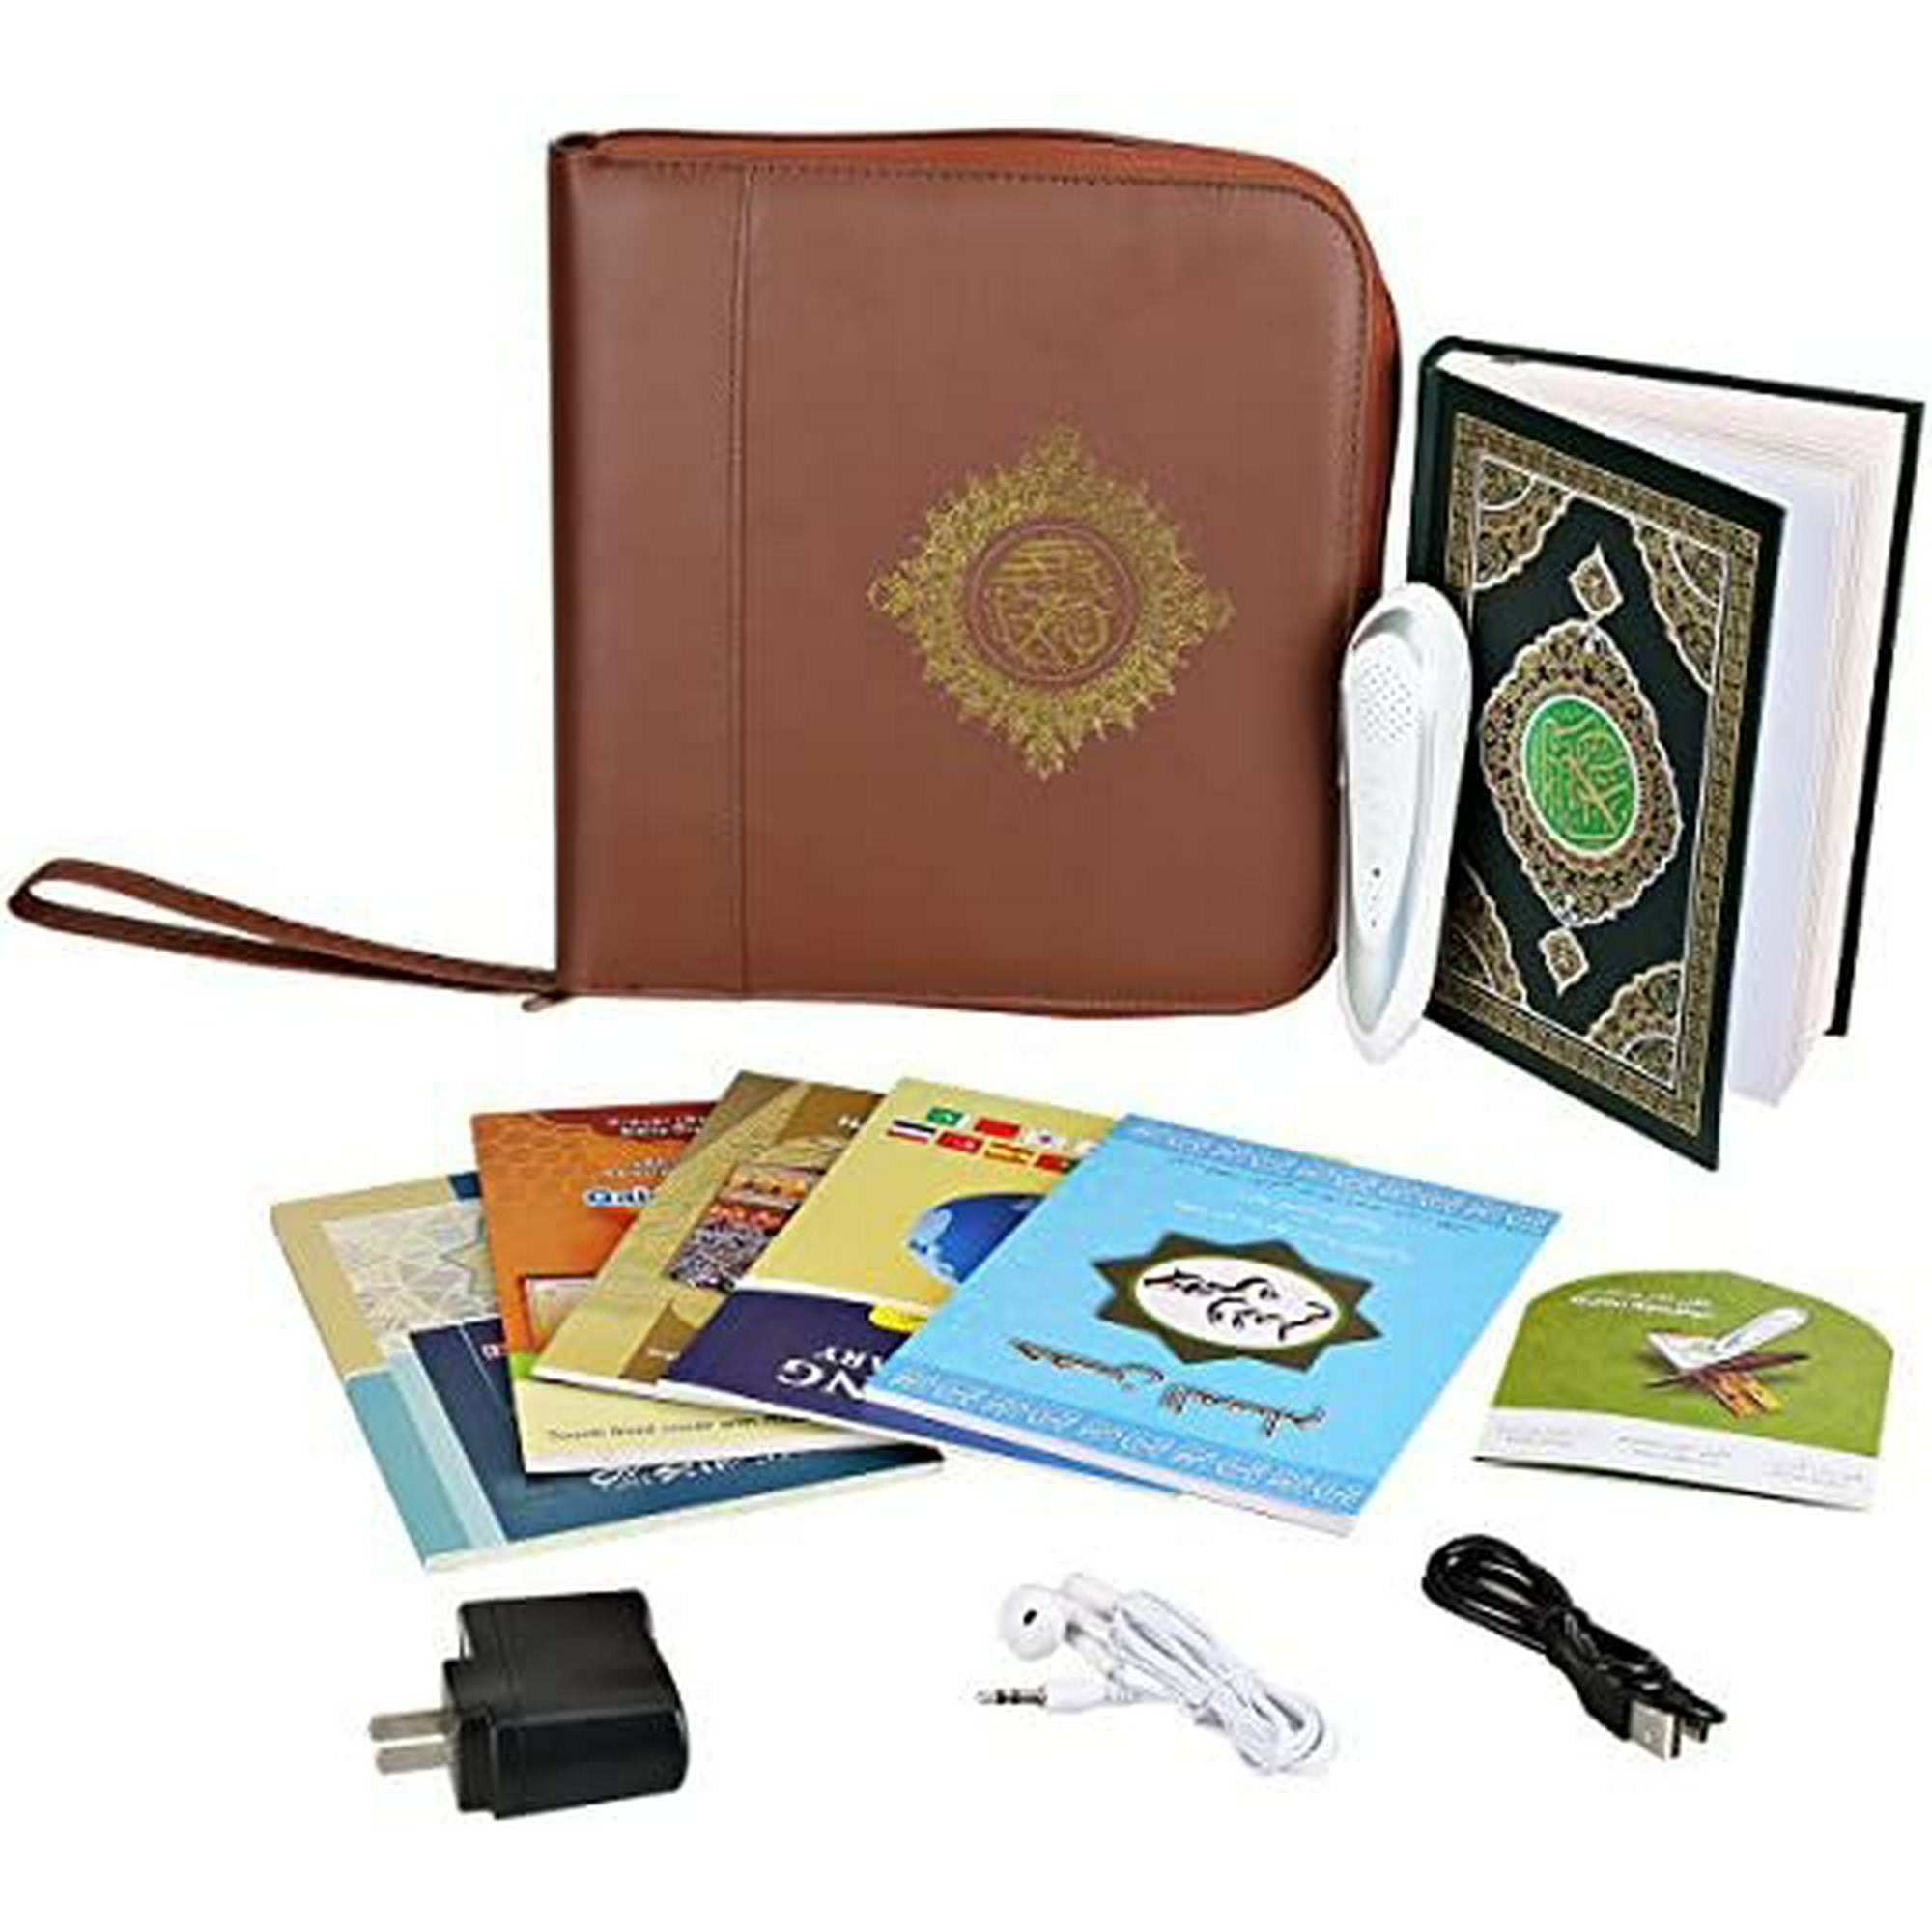 Martin Luther King Junior Pasen Oppositie Ramadan Digital Holy Quran Pen Reader Leather Bag Muslim Pen Qur'an Learner  30Languages and Reciters Five Small Books | Walmart Canada